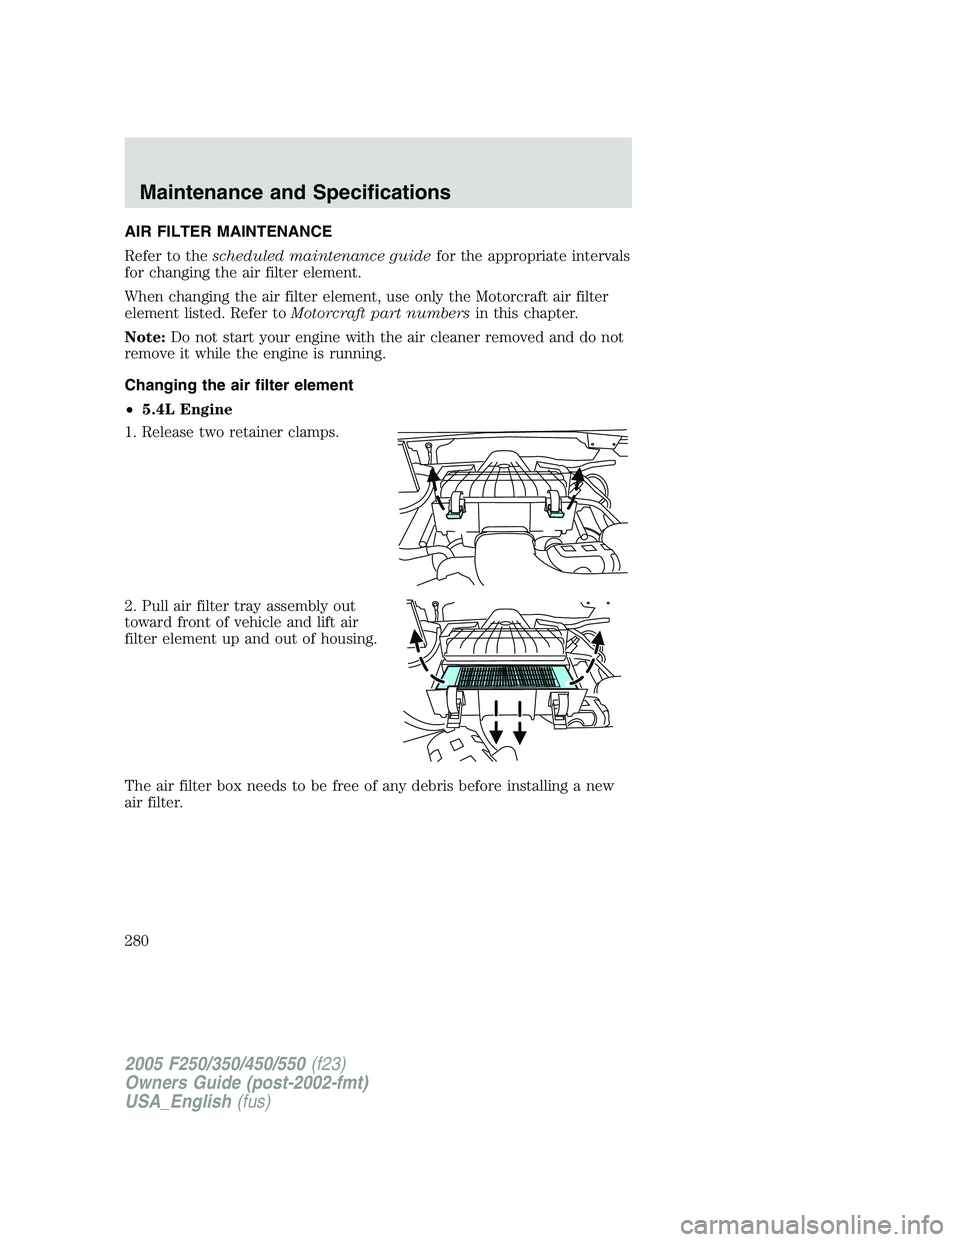 FORD F250 SUPER DUTY 2005  Owners Manual AIR FILTER MAINTENANCE
Refer to the scheduled maintenance guide for the appropriate intervals
for changing the air filter element.
When changing the air filter element, use only the Motorcraft air fil